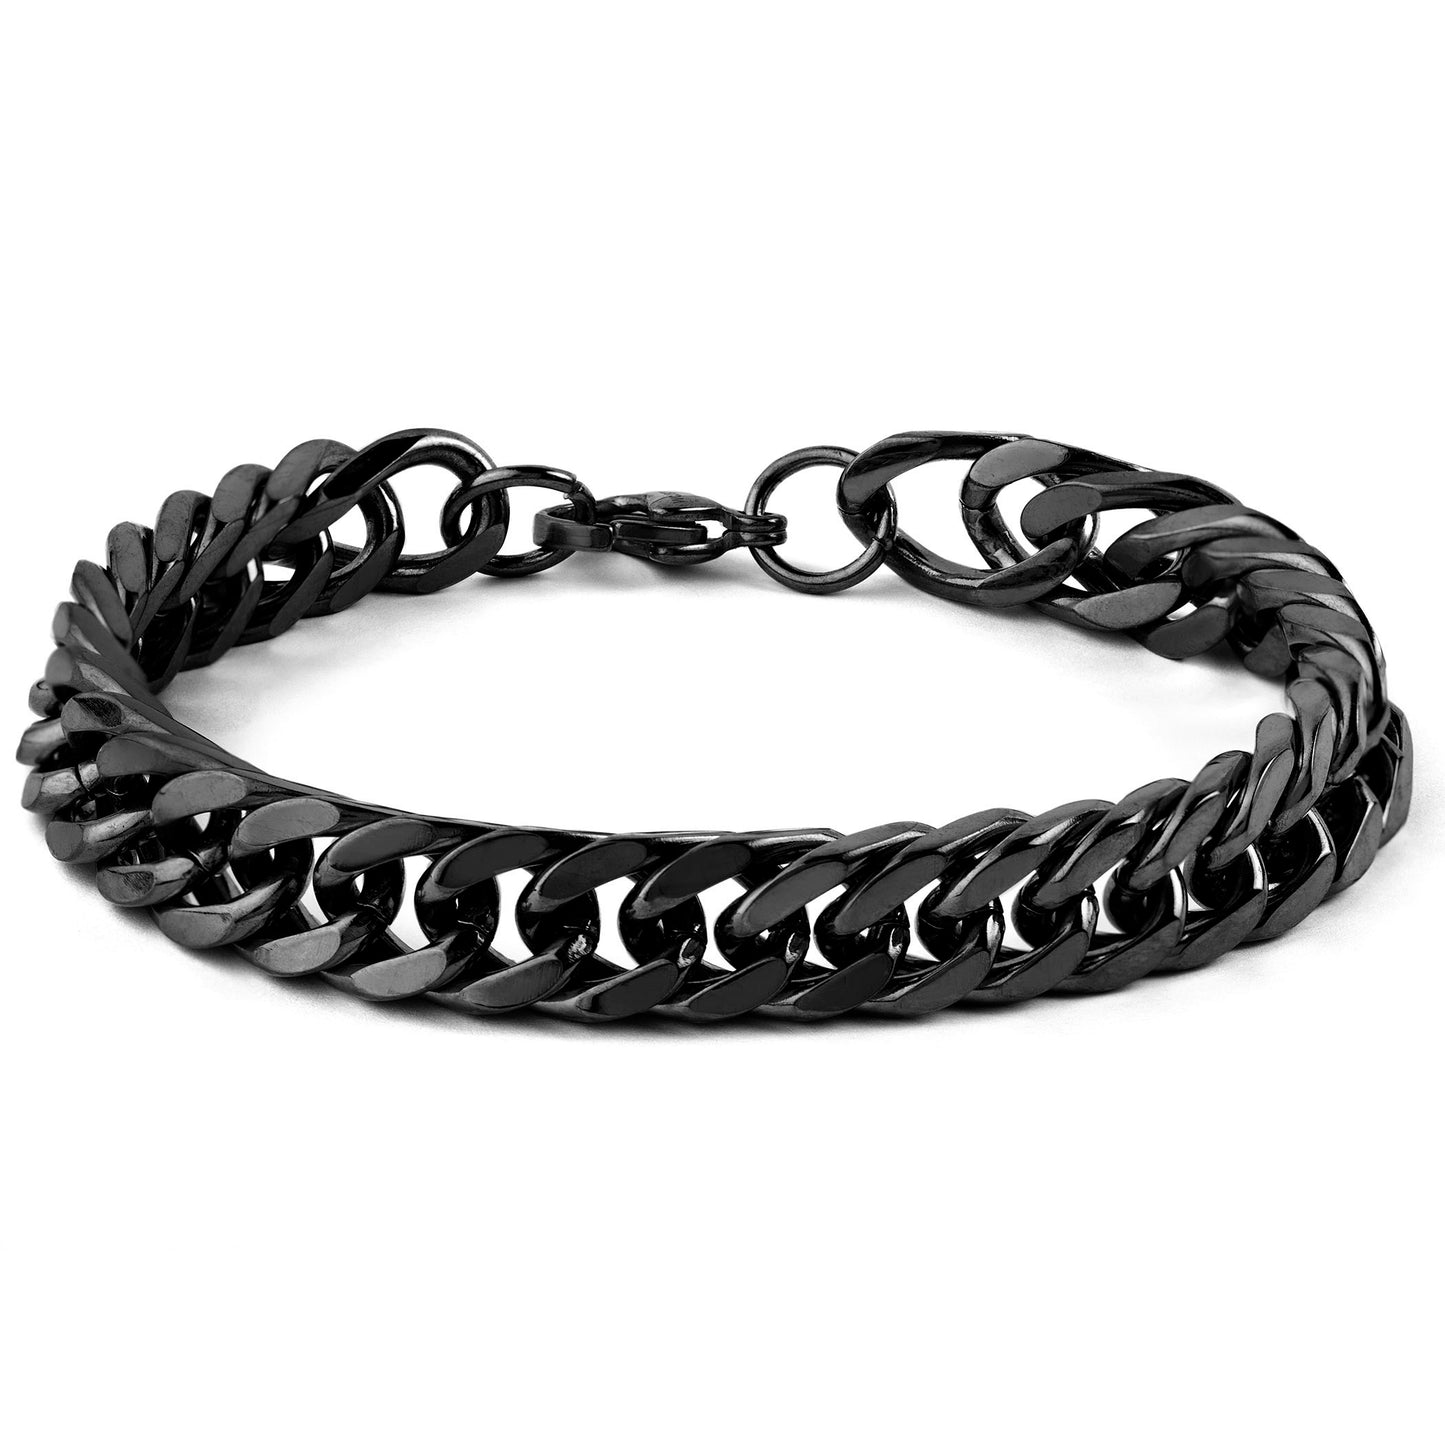 Men's Polished Stainless Steel Curb Chain Bracelet (10mm) - 8"